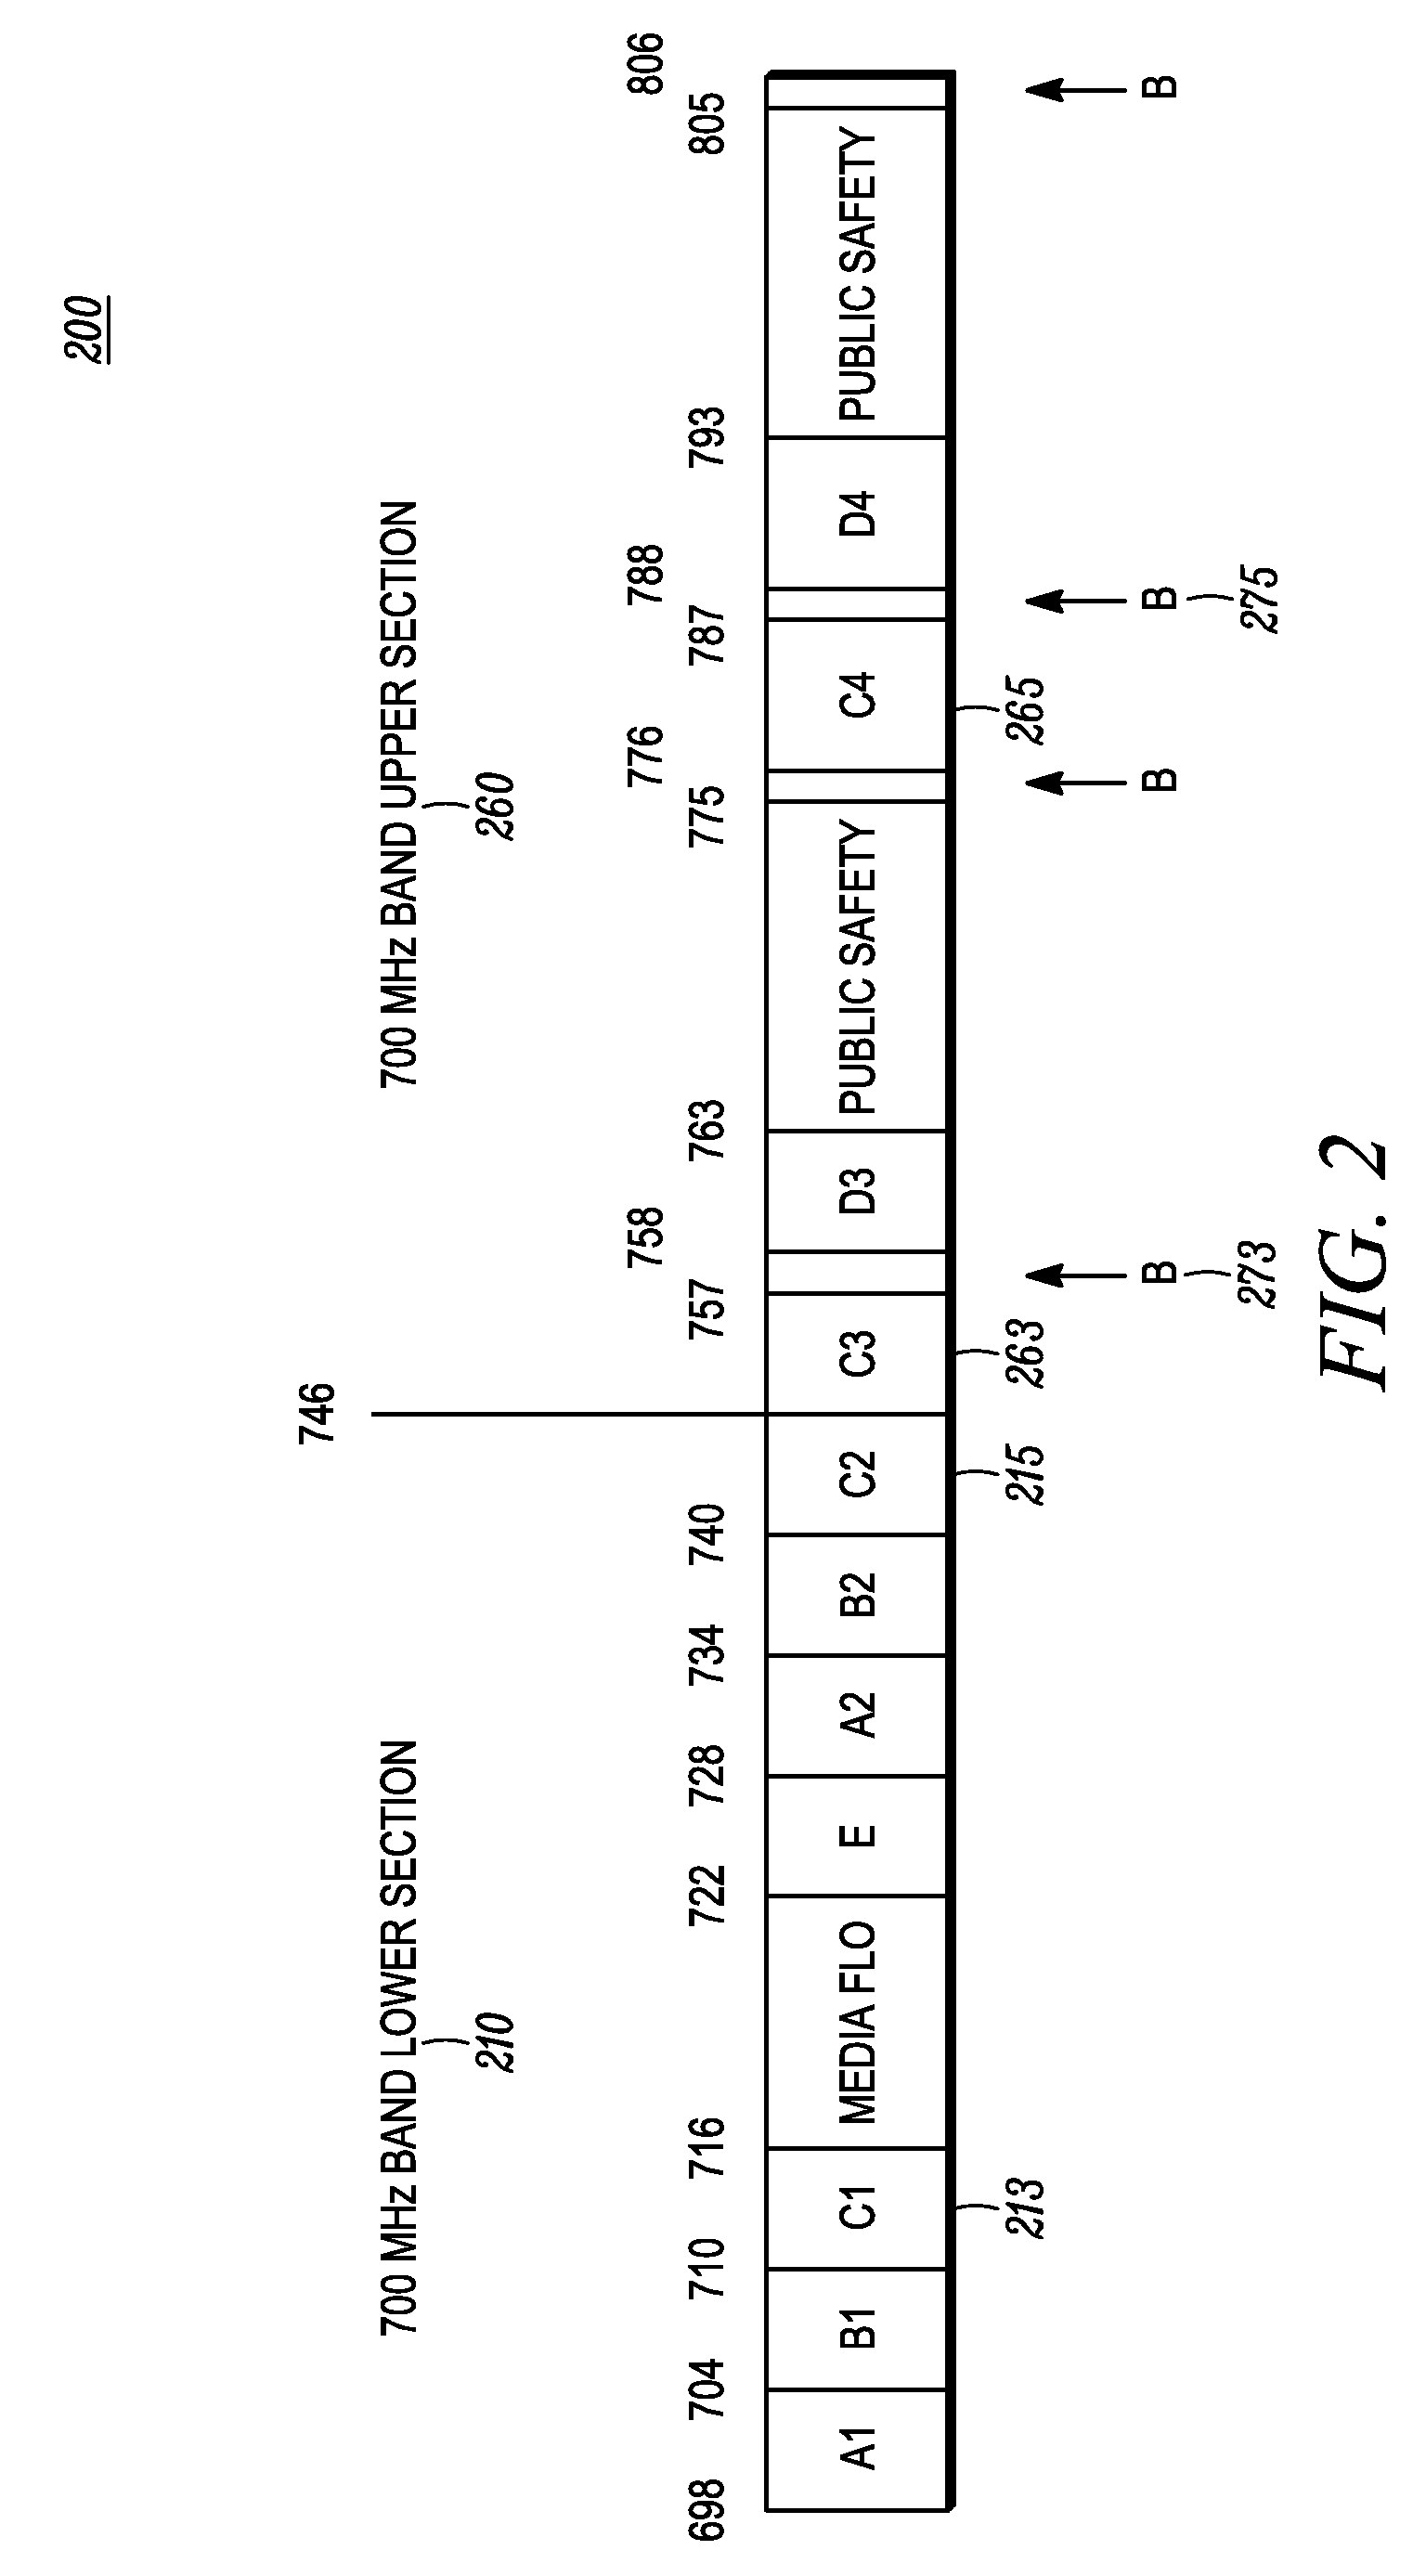 Method and System for Signal Processing and Transmission